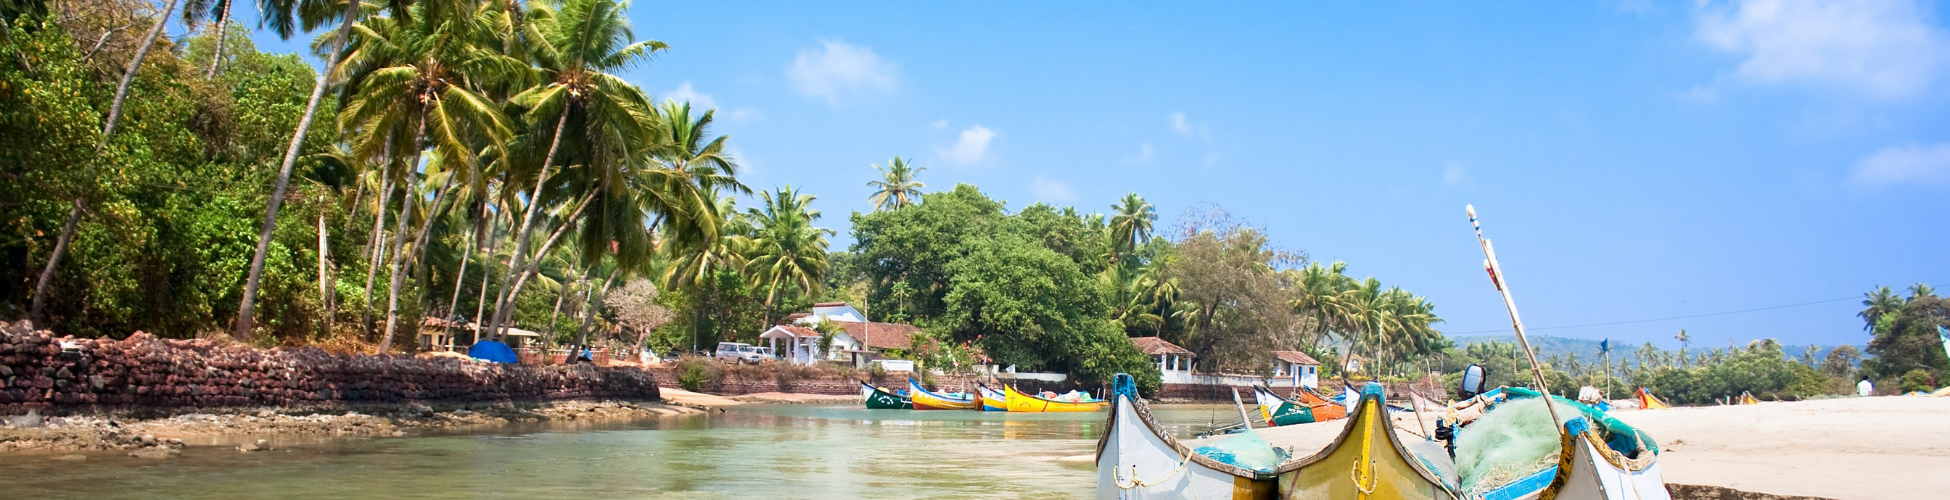 Goa Trip Packages 3 Days from Mumbai